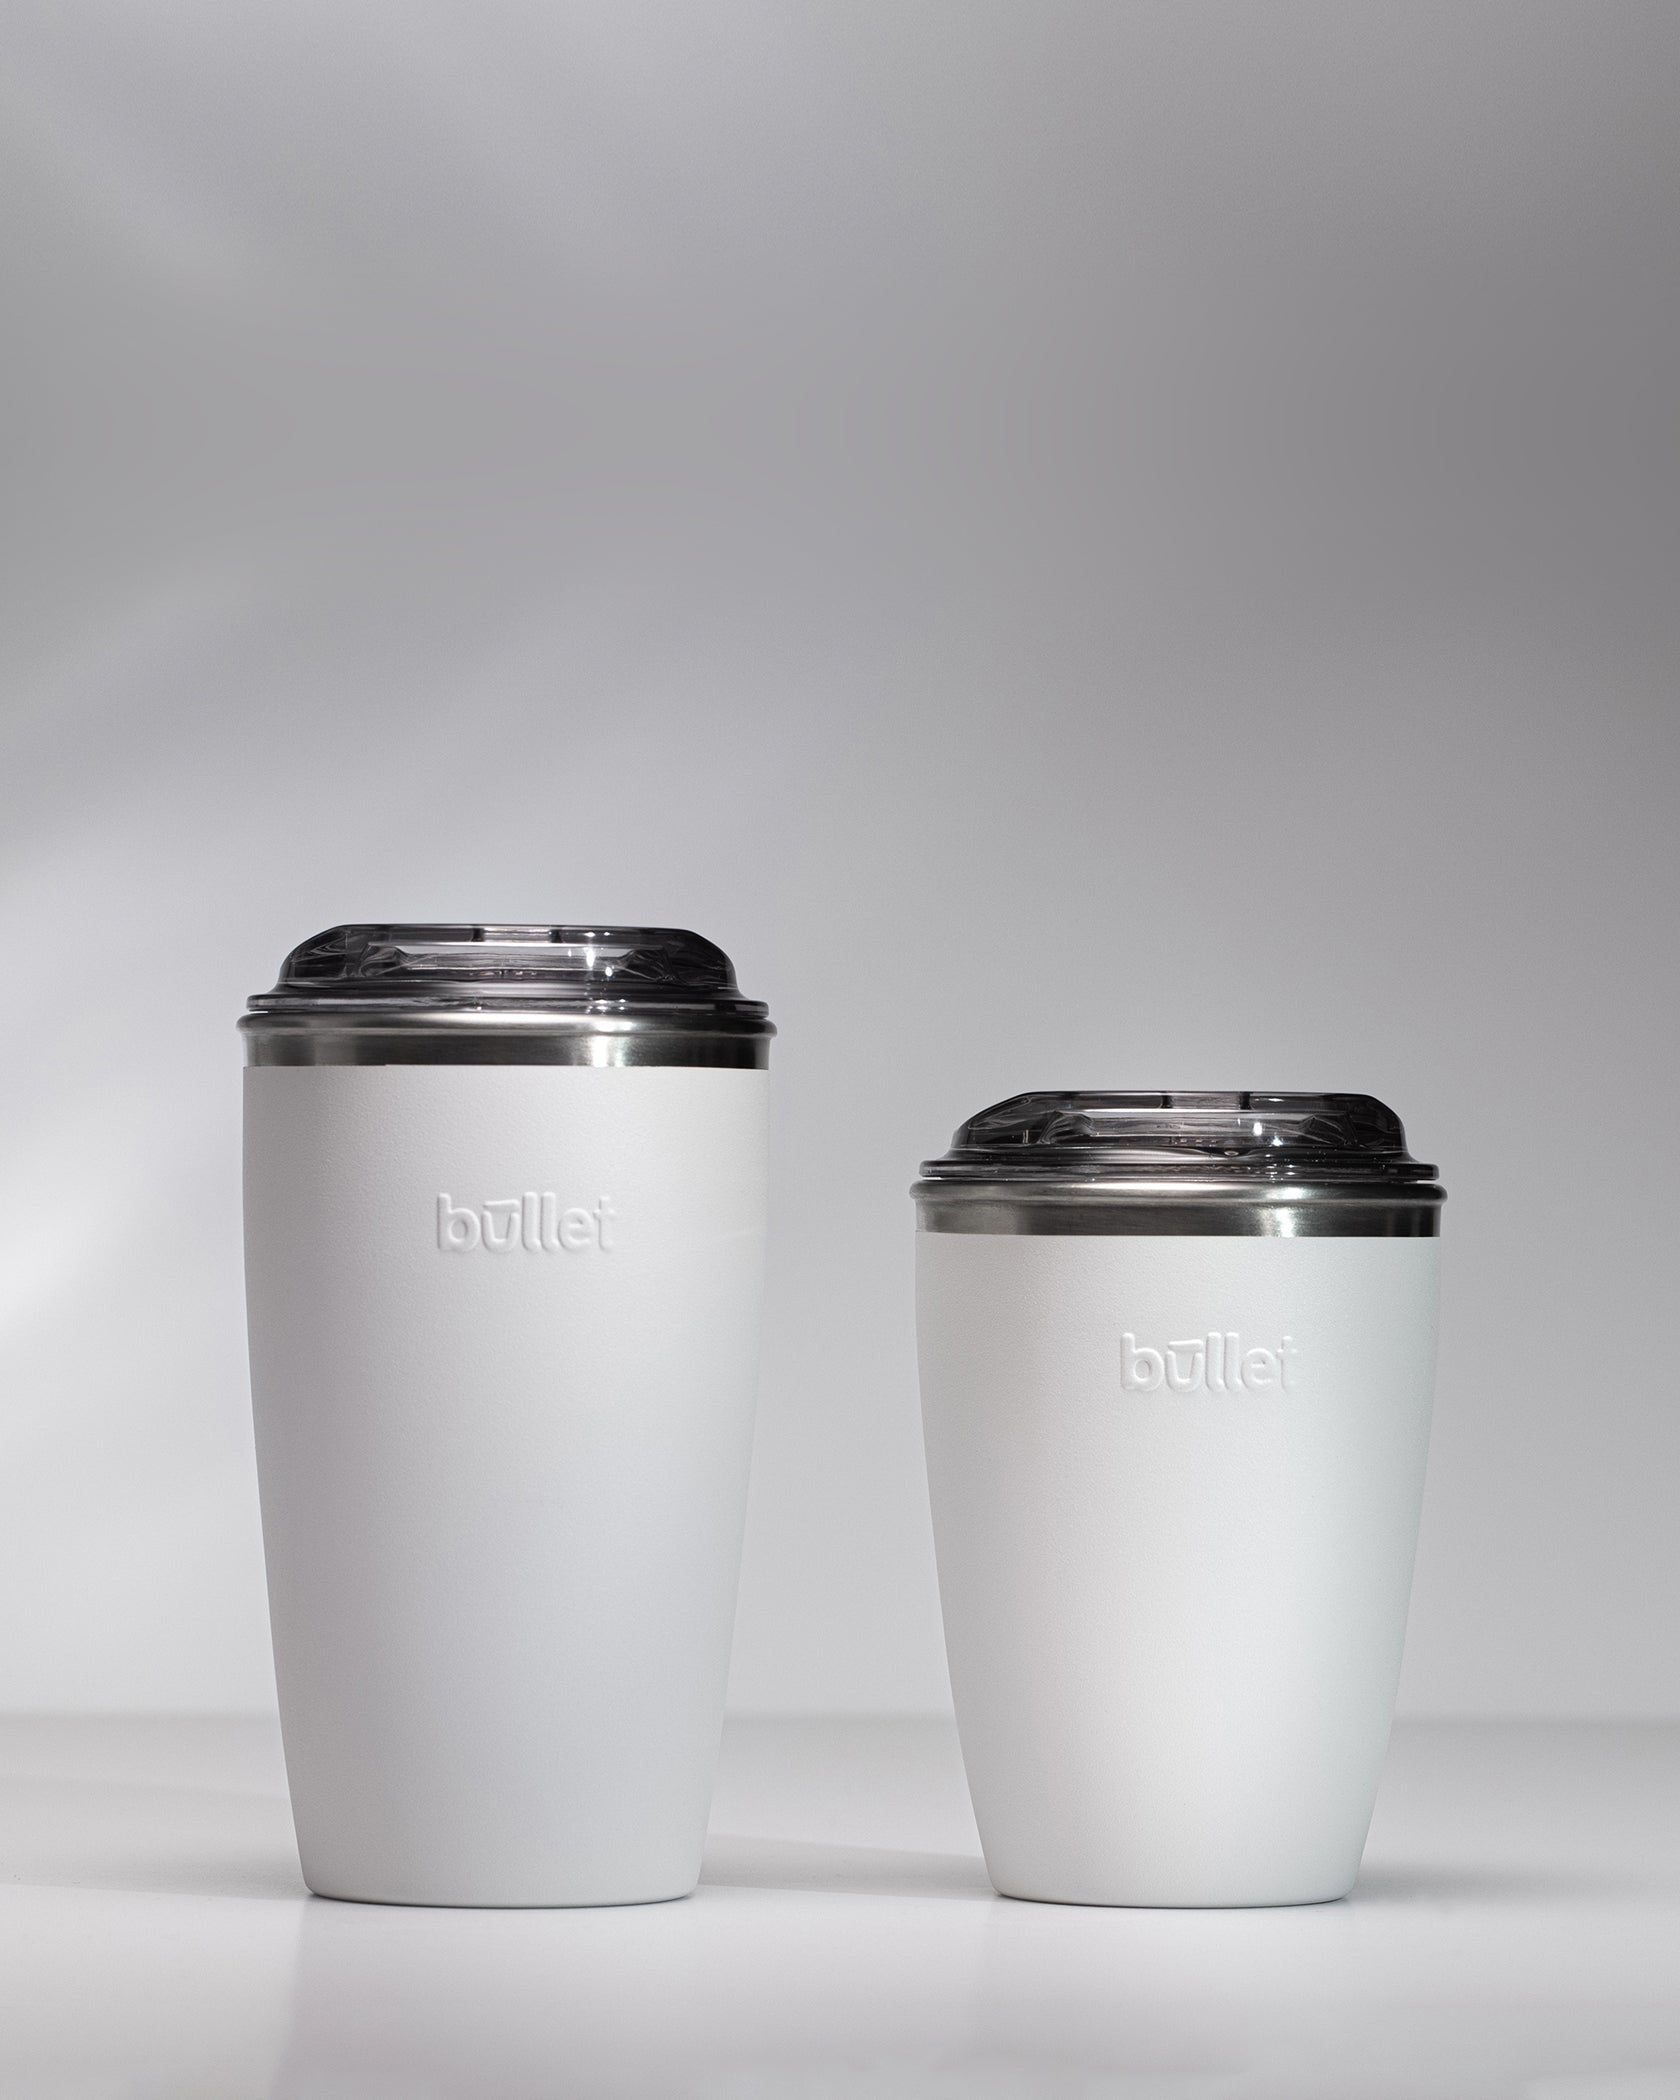 side by side comparison of an 8oz and 12oz white bullet cup